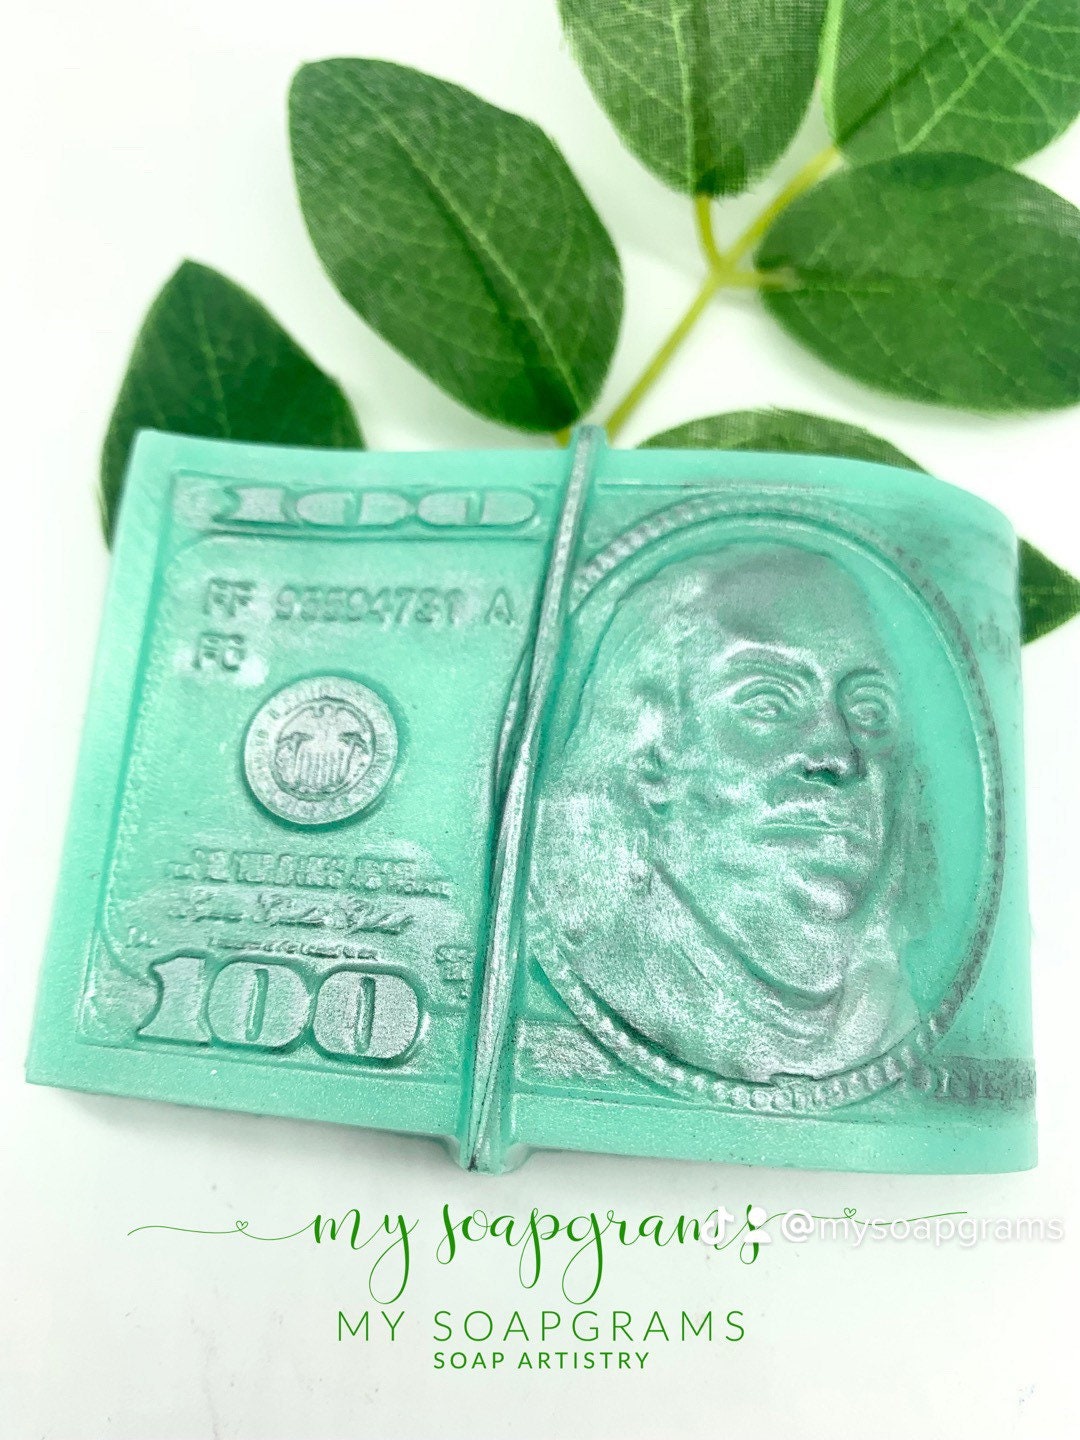 1 Money Soap Bar with Real Cash Inside Up to $100 Bill Inside in Each Bar